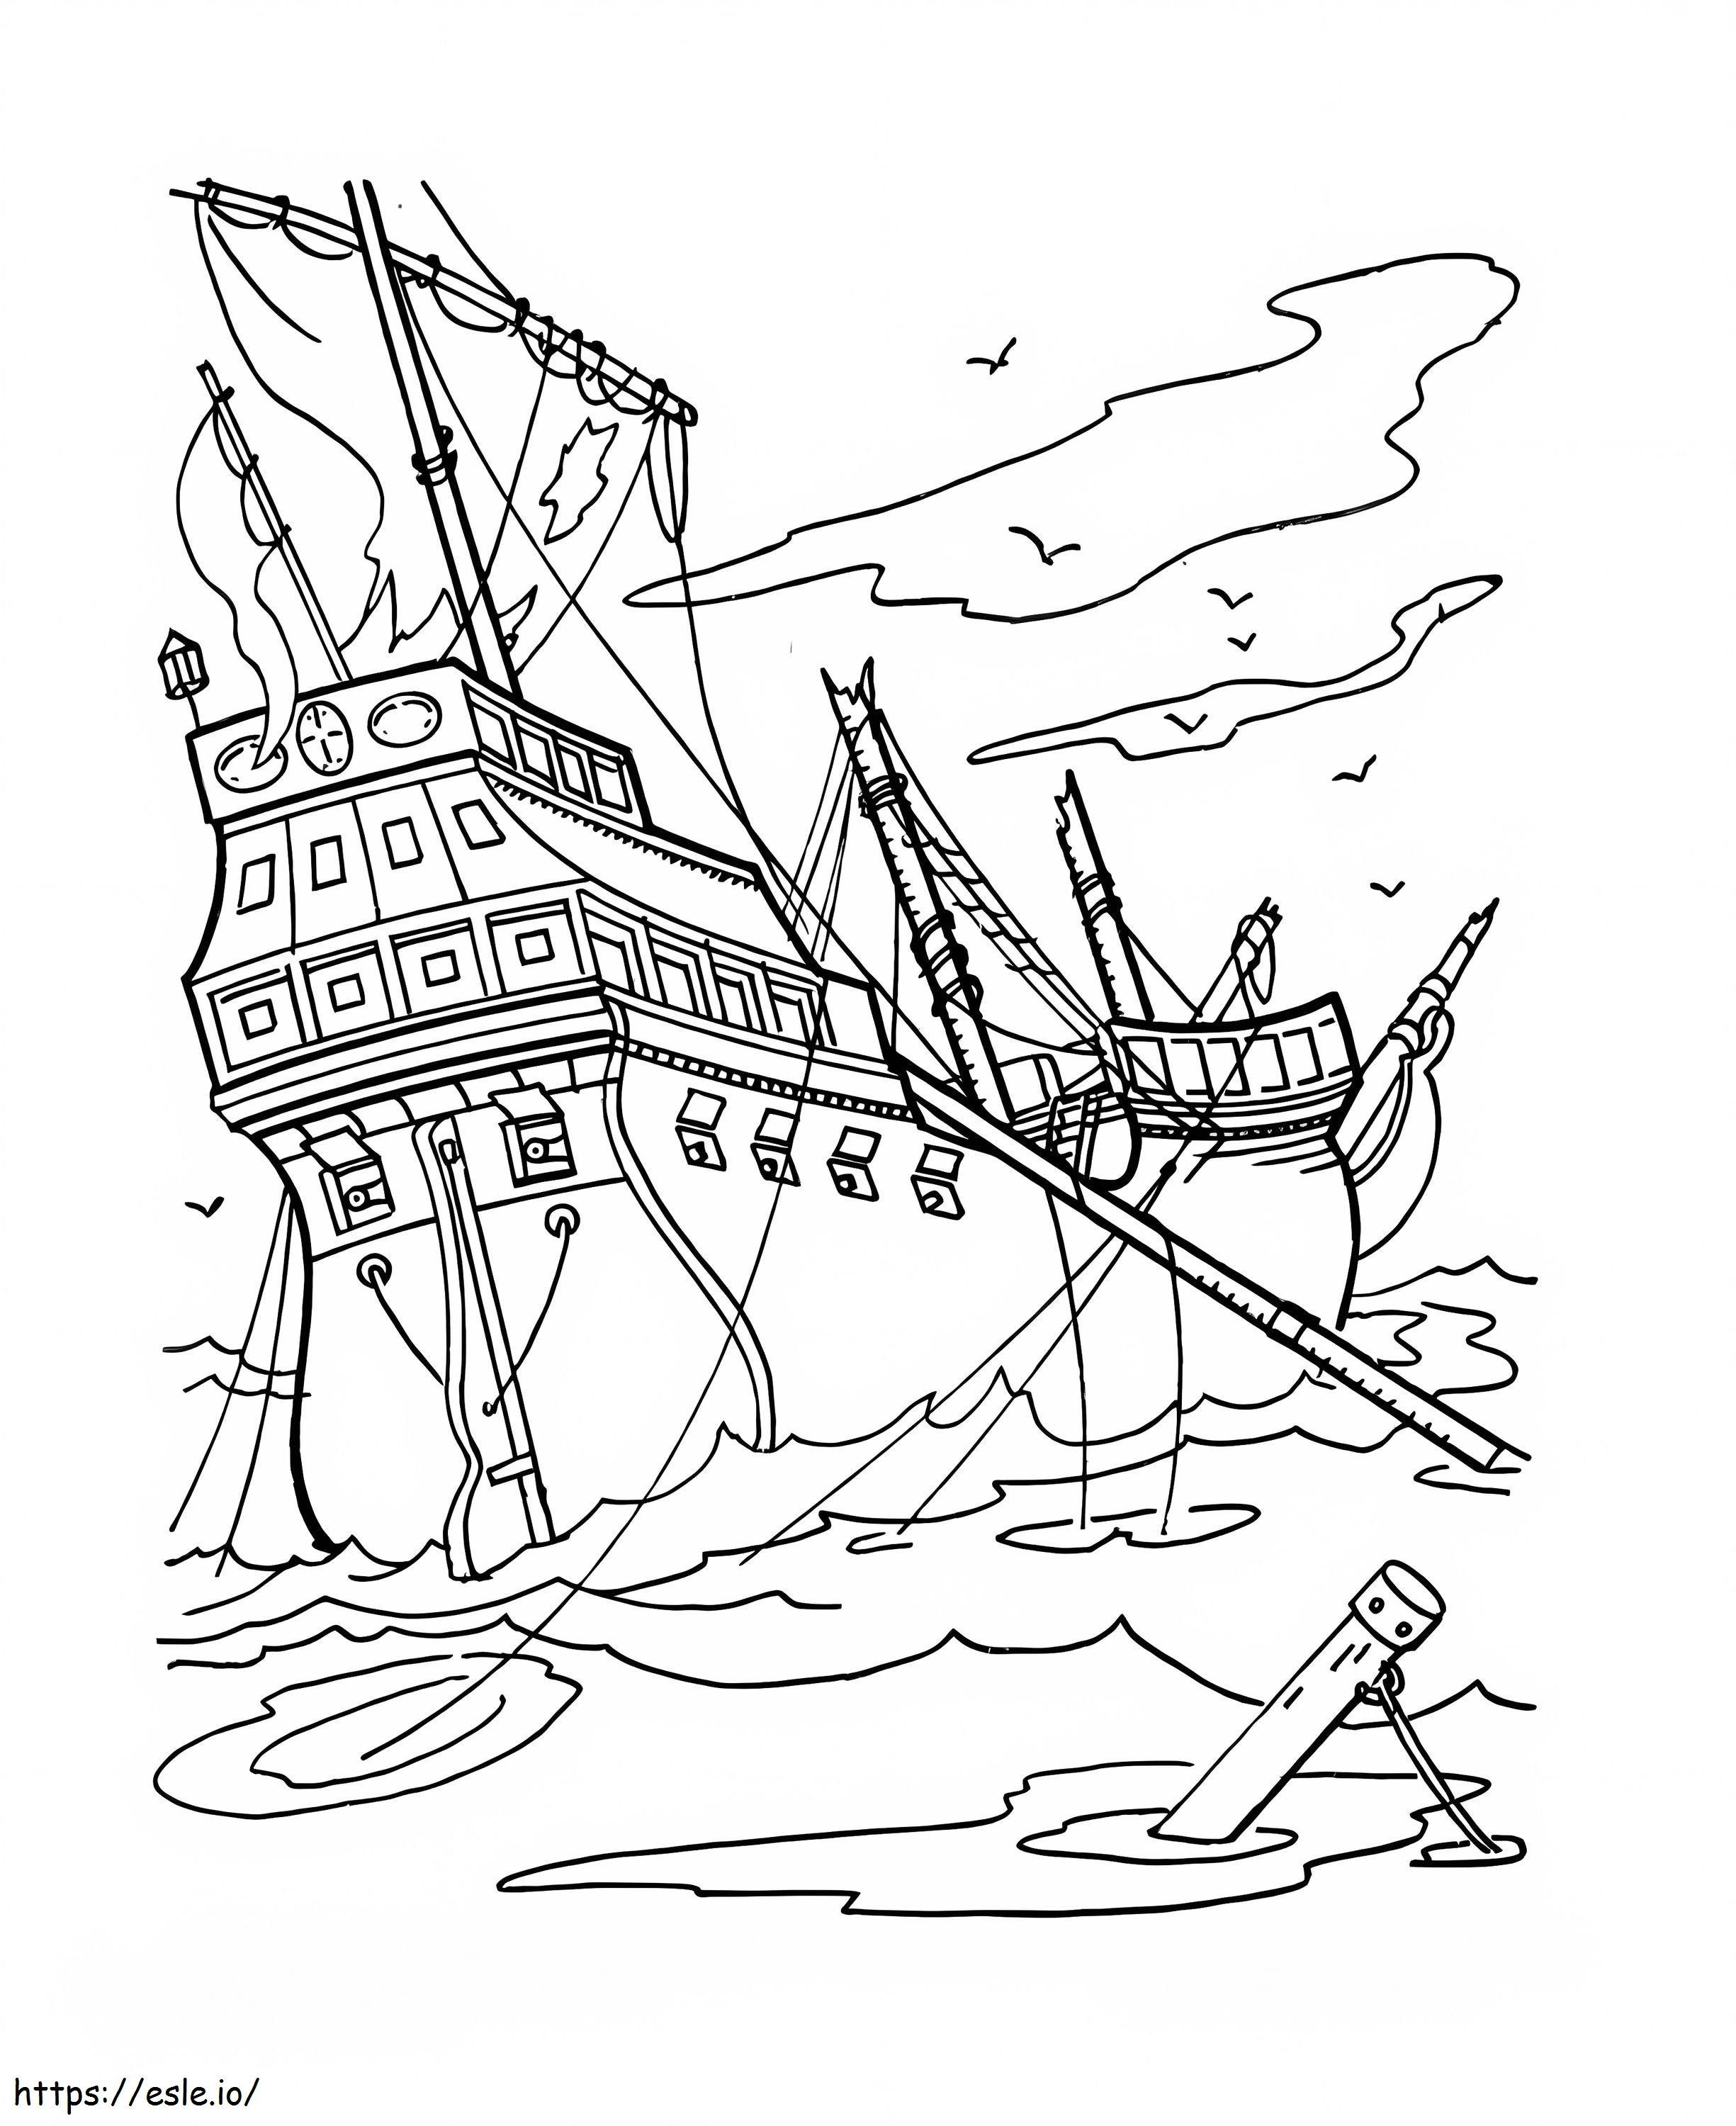 Wrecked Pirate Ship coloring page